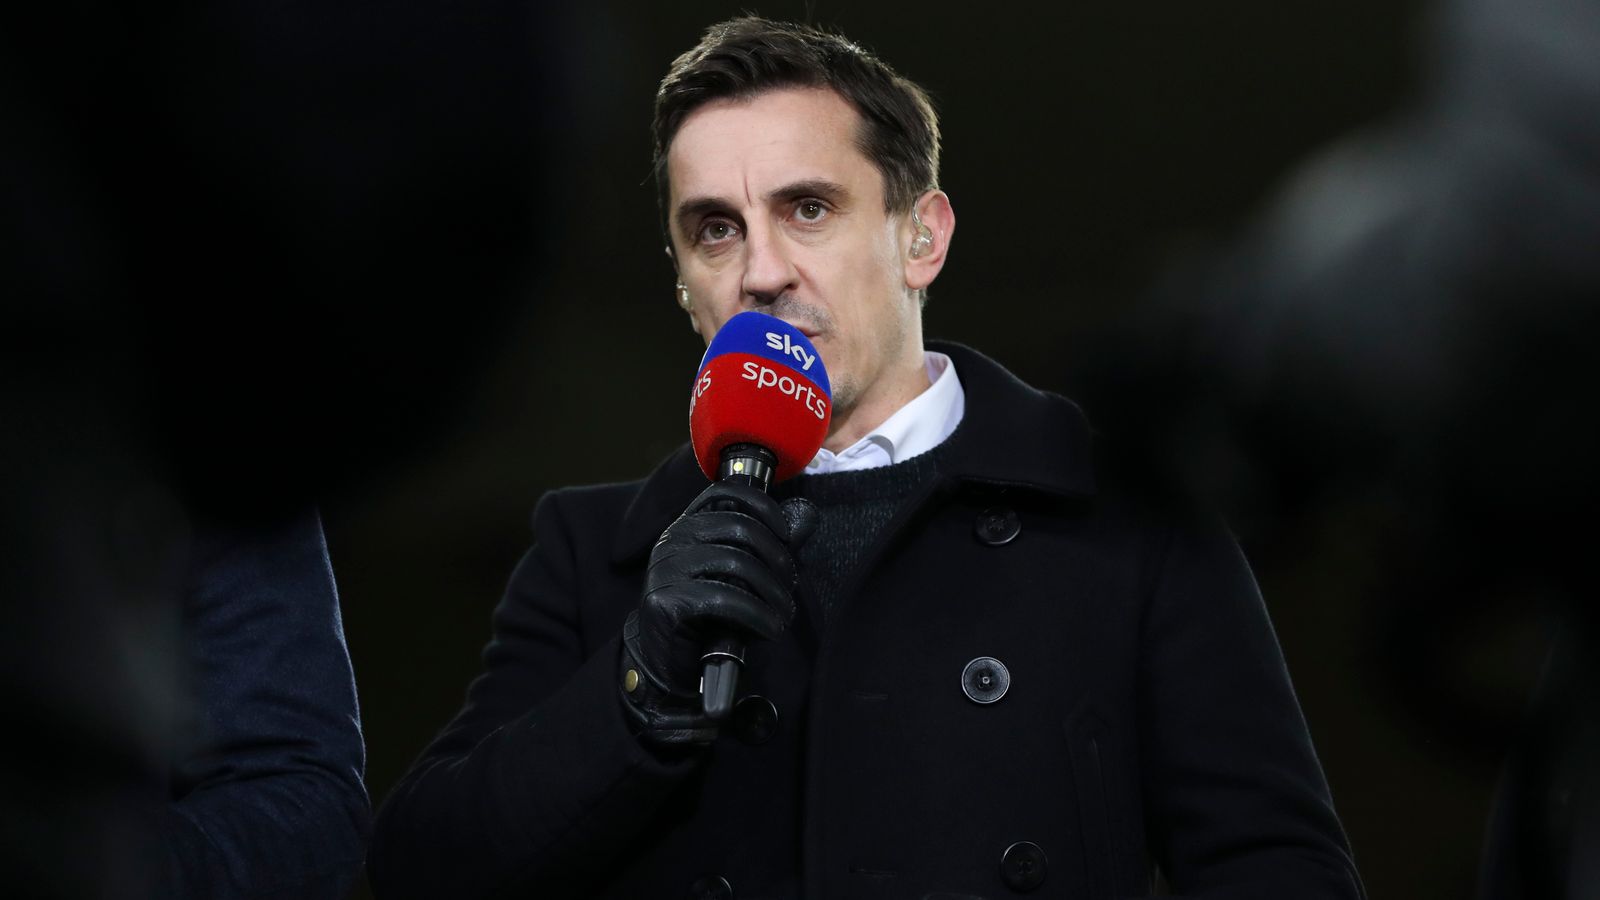 Ex-United Captain Gary Neville slams Manchester United's 'Theater of Nothing' with fans left 'bored'